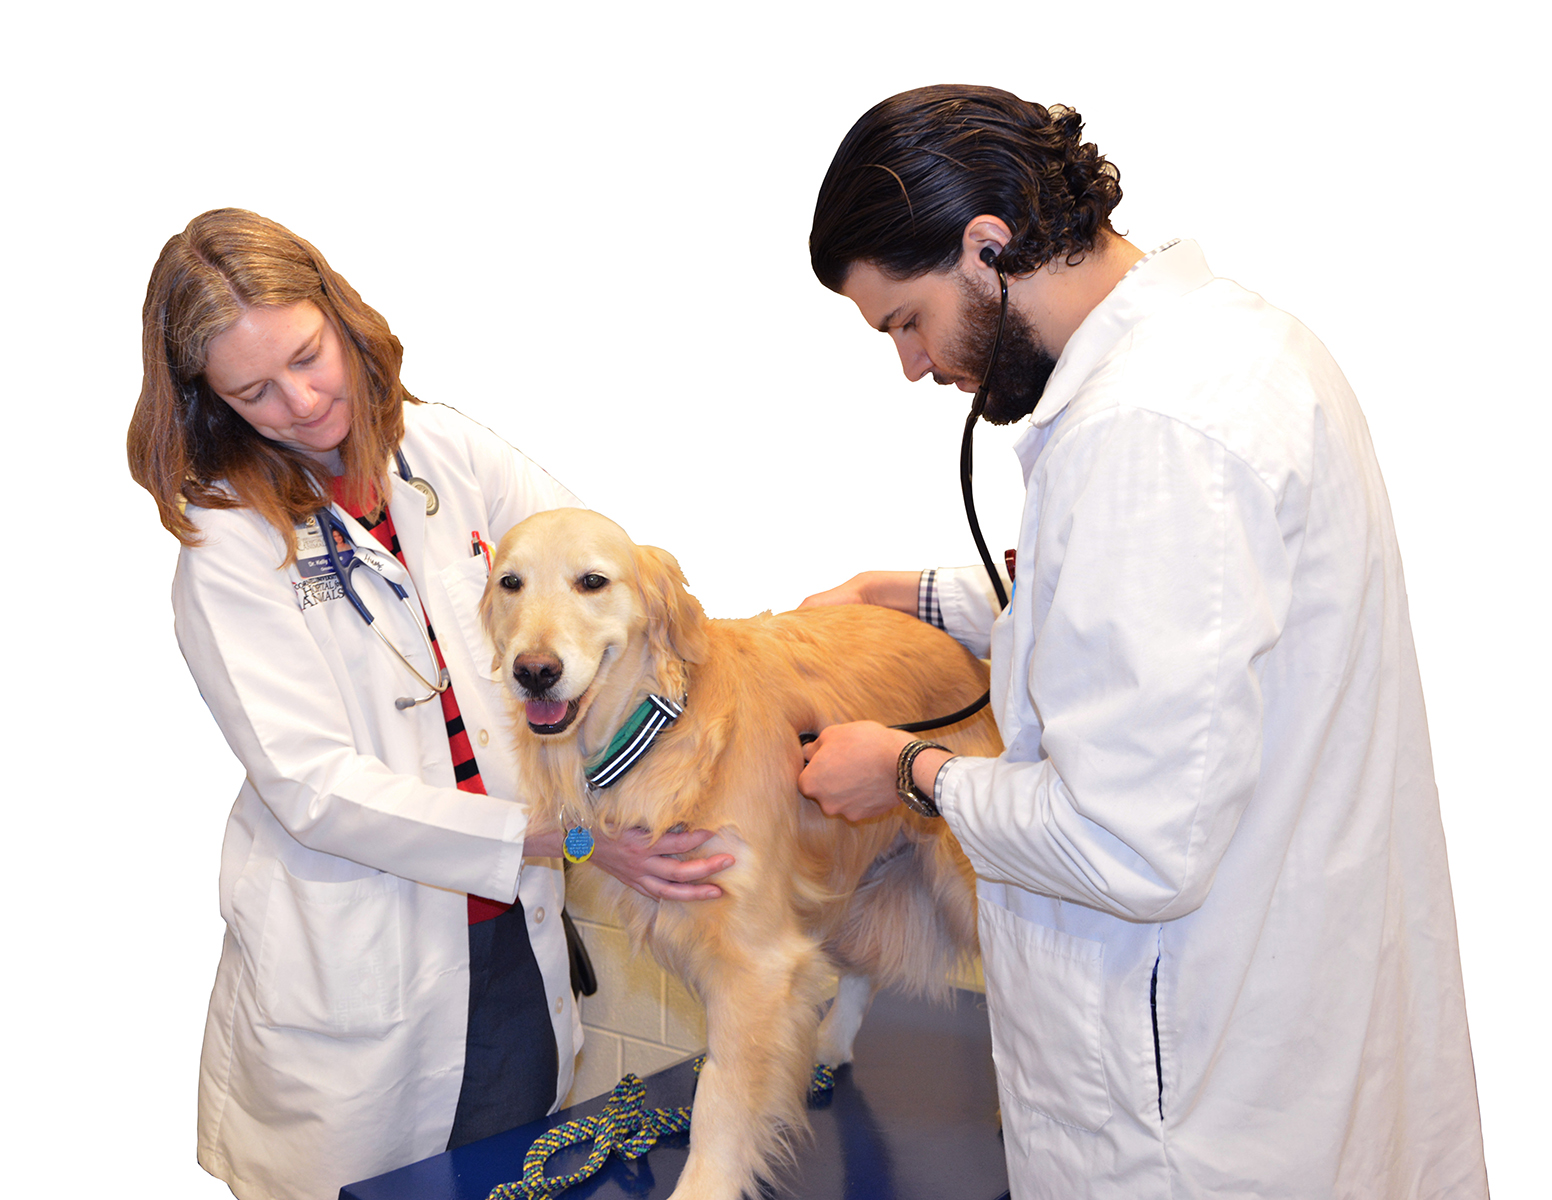 Treatment for canine cancer serves as model for humans | What's Up at  Upstate | SUNY Upstate Medical University